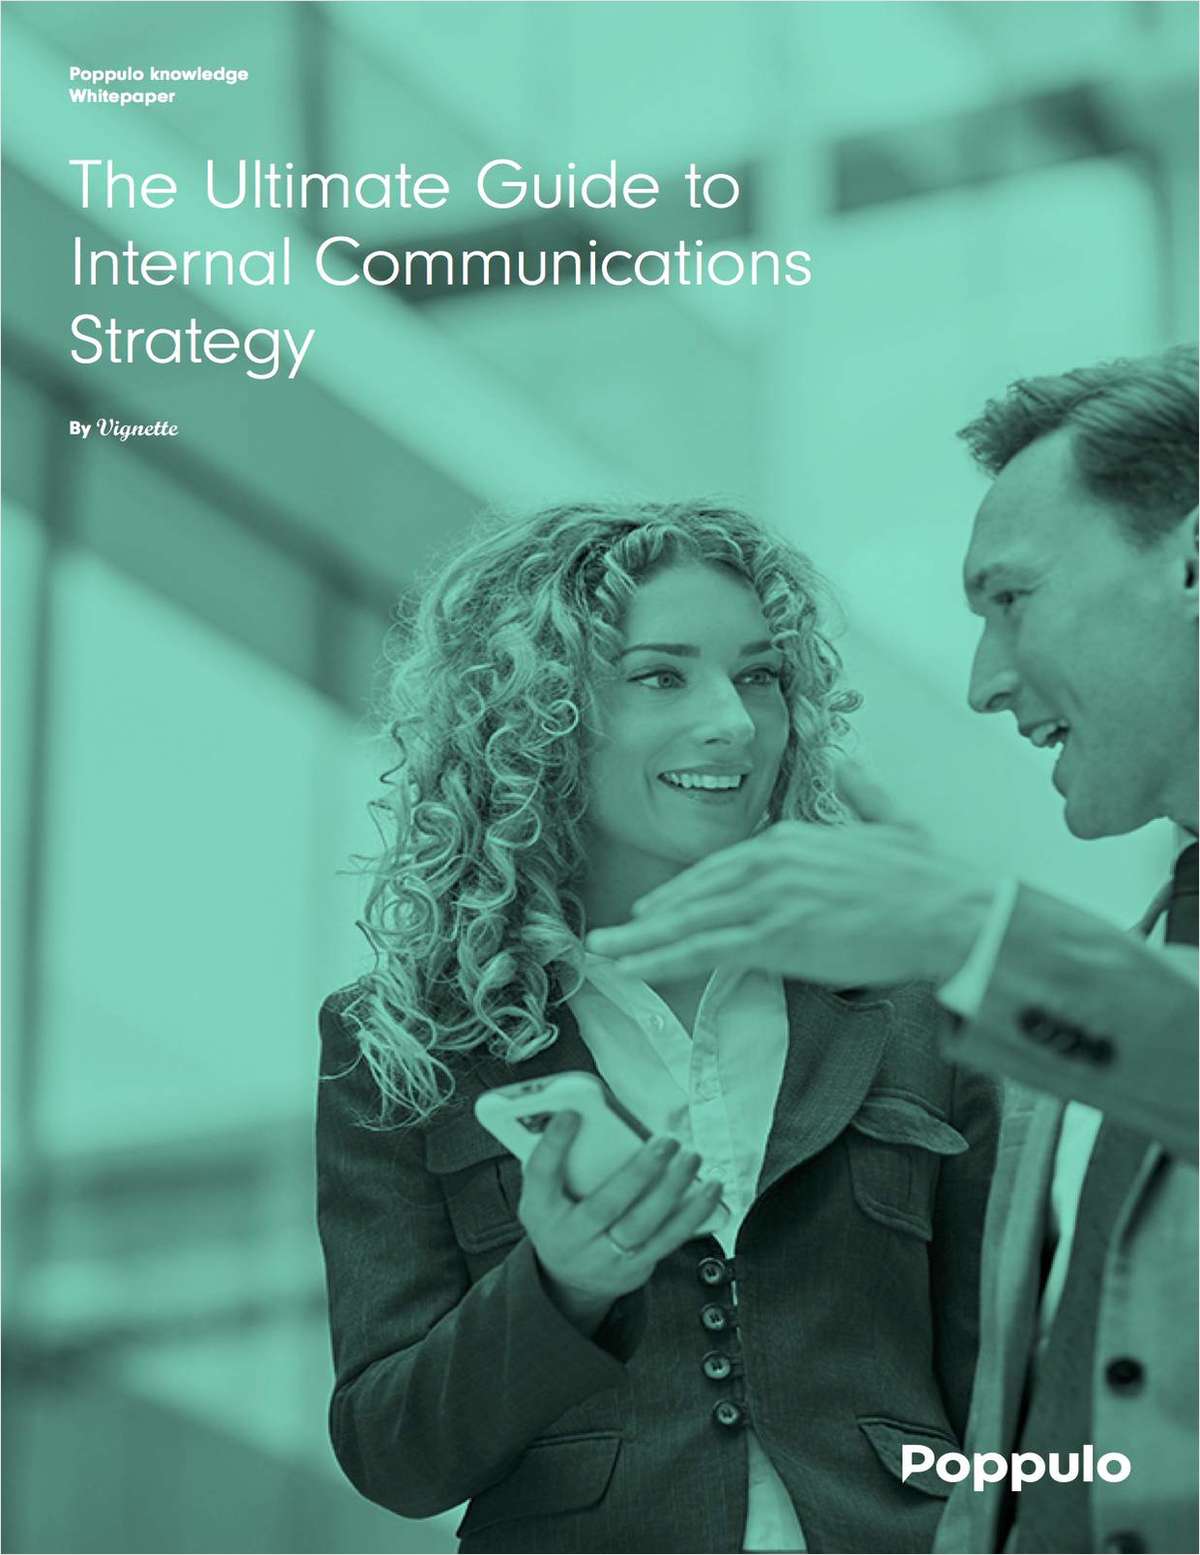 The Ultimate Guide to Internal Communications Strategy